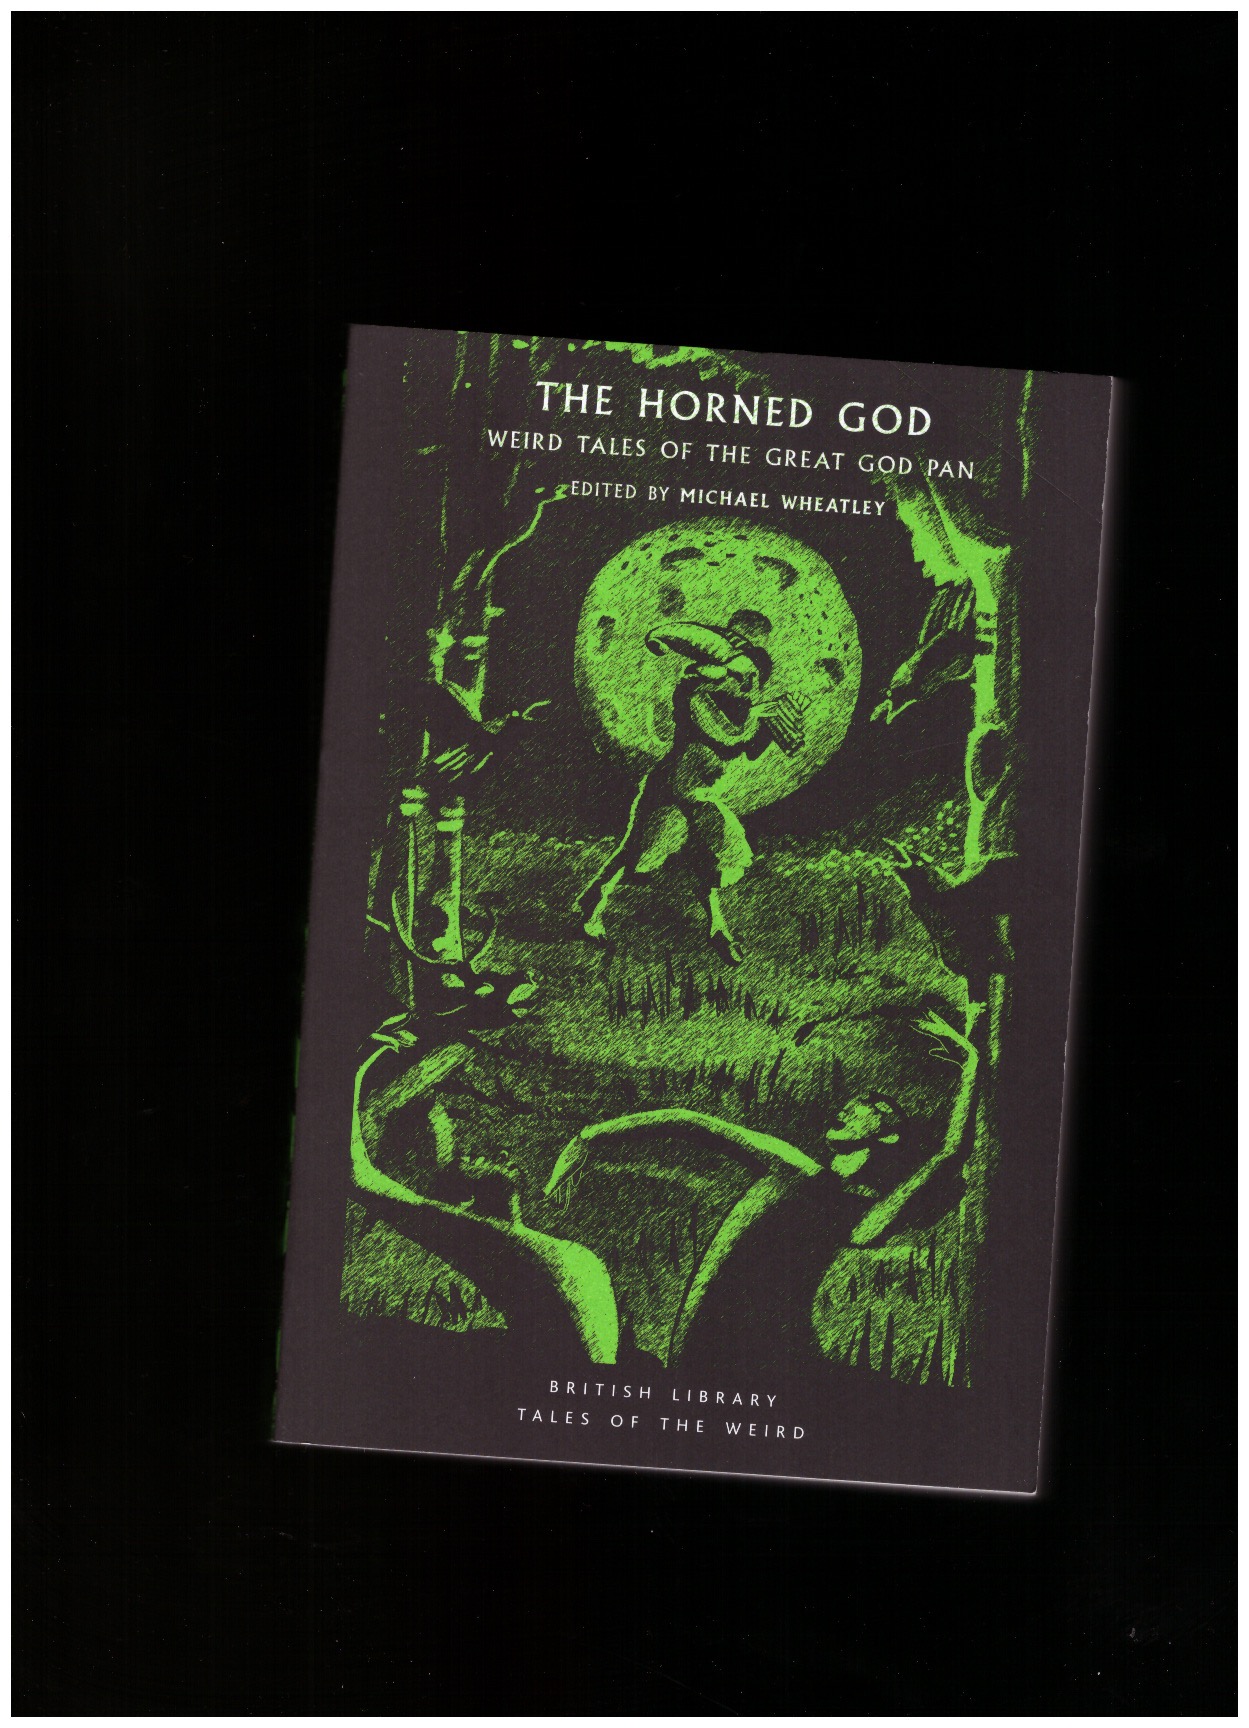 WEATHLEY, Michael (ed.) - The Horned God: Weird Tales of the Great God Pan